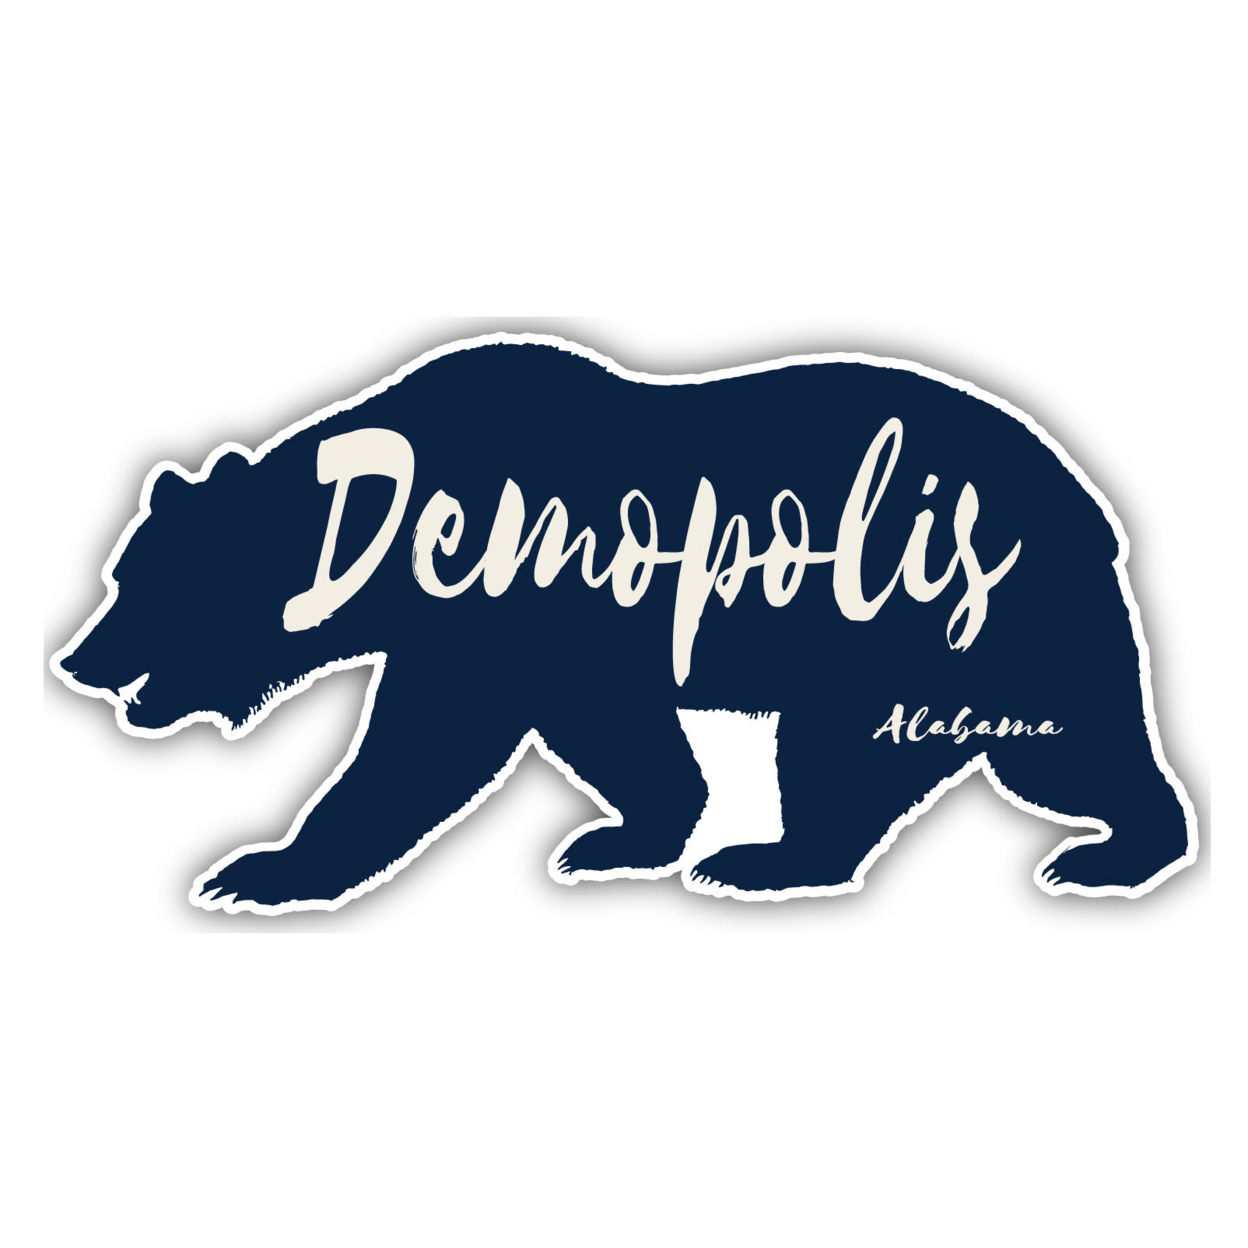 Demopolis Alabama Souvenir Decorative Stickers (Choose Theme And Size) - 4-Pack, 4-Inch, Great Outdoors